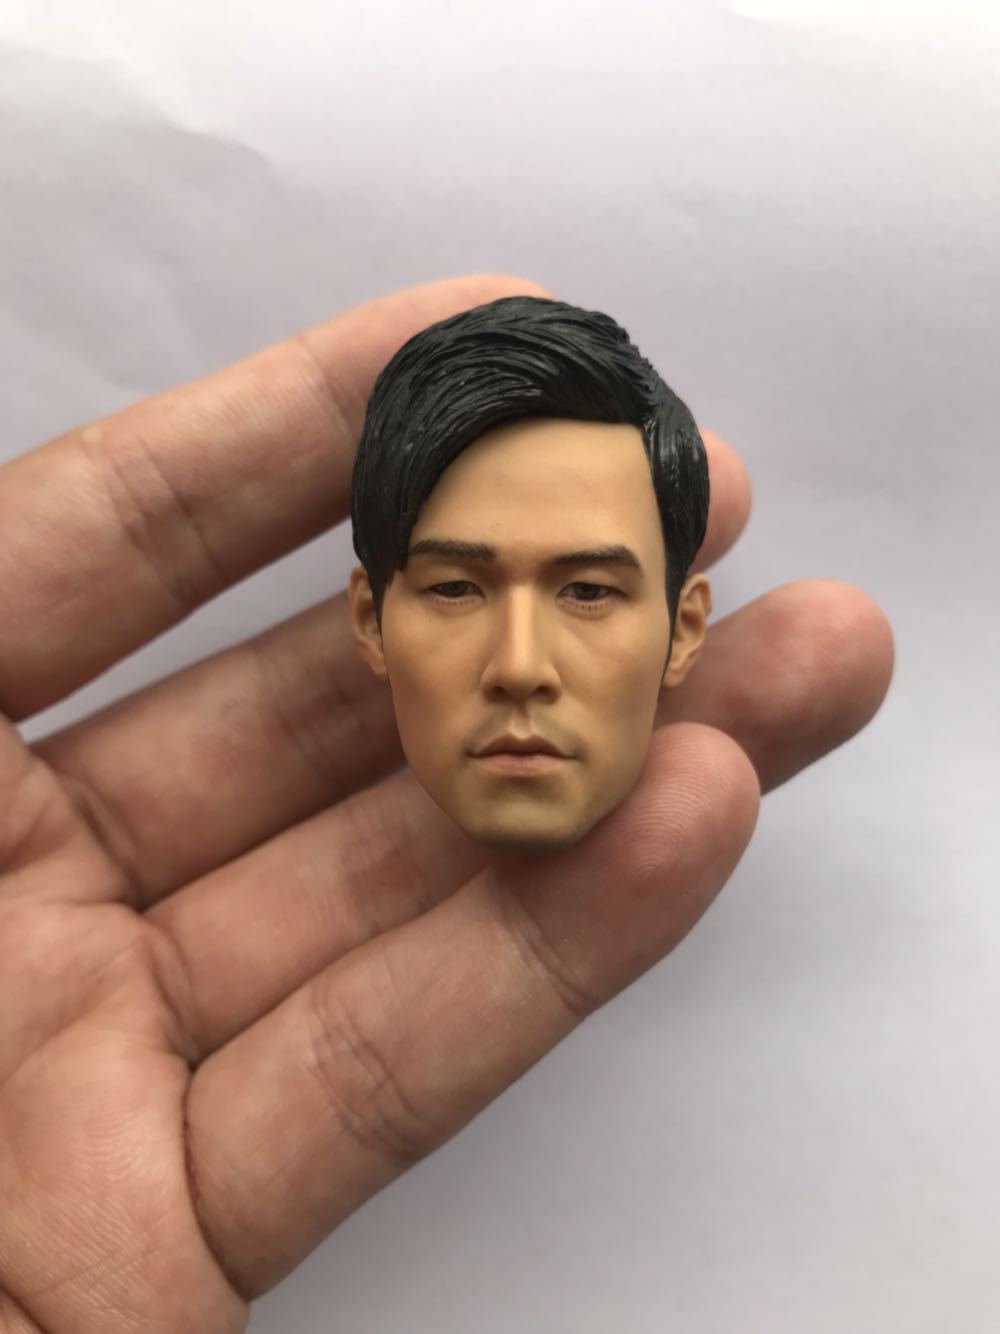 Details about   Plastic Toy Sculpted Head Accessory for 12" Action Figure1:6 scale 